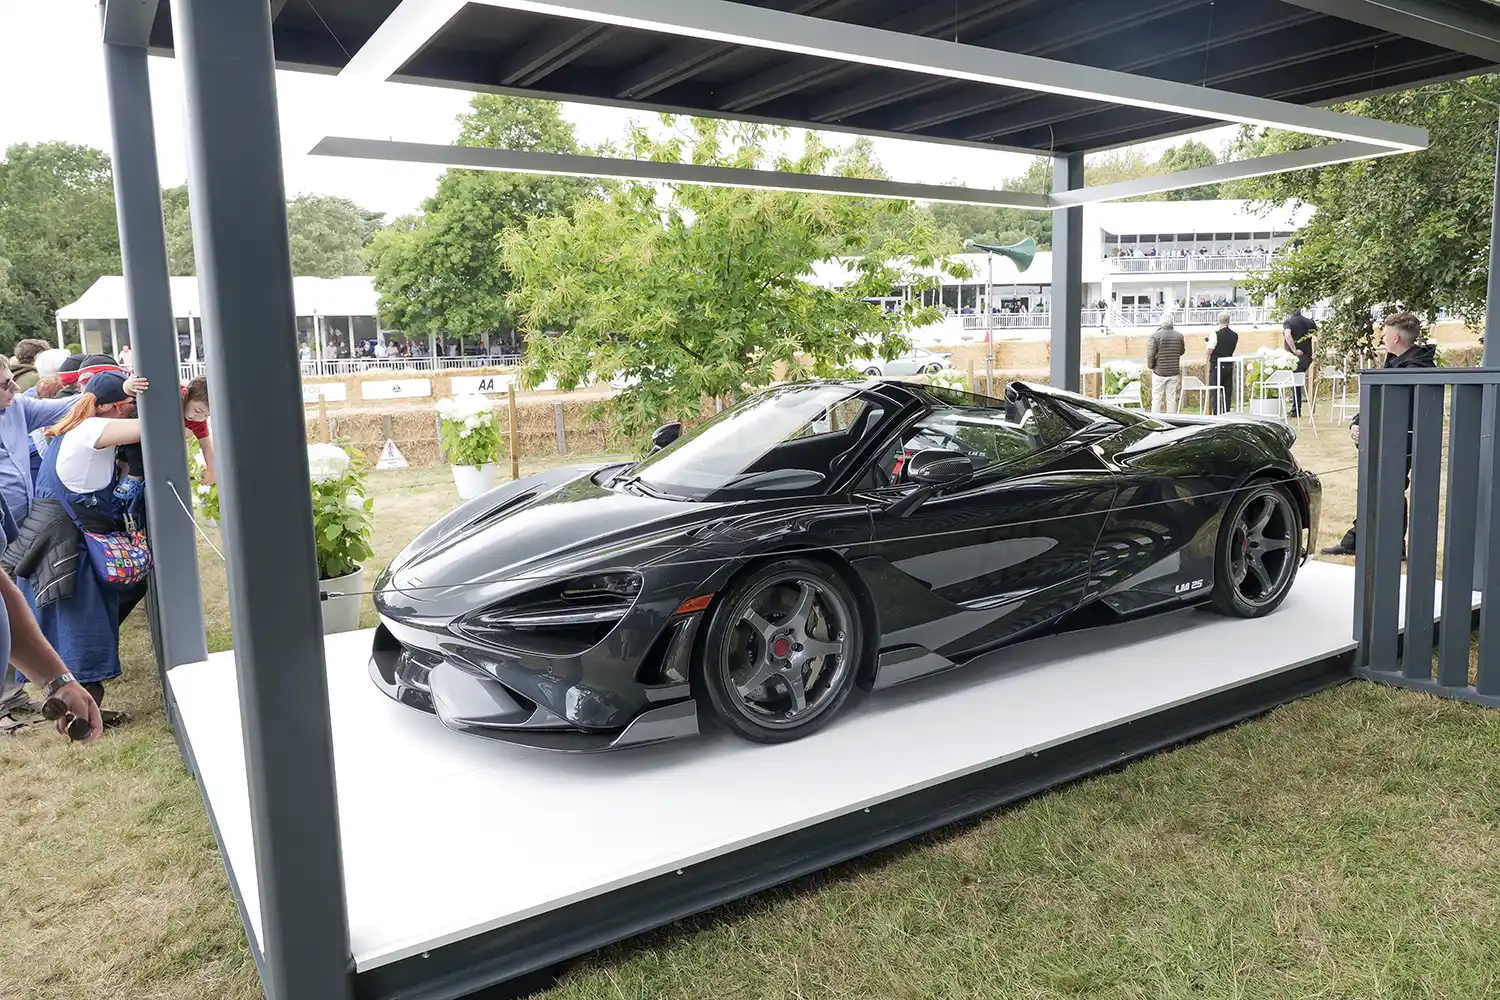 Dymag’s world-leading carbon hybrid wheels support multiple high-performance vehicle makers at Goodwood Festival of Speed